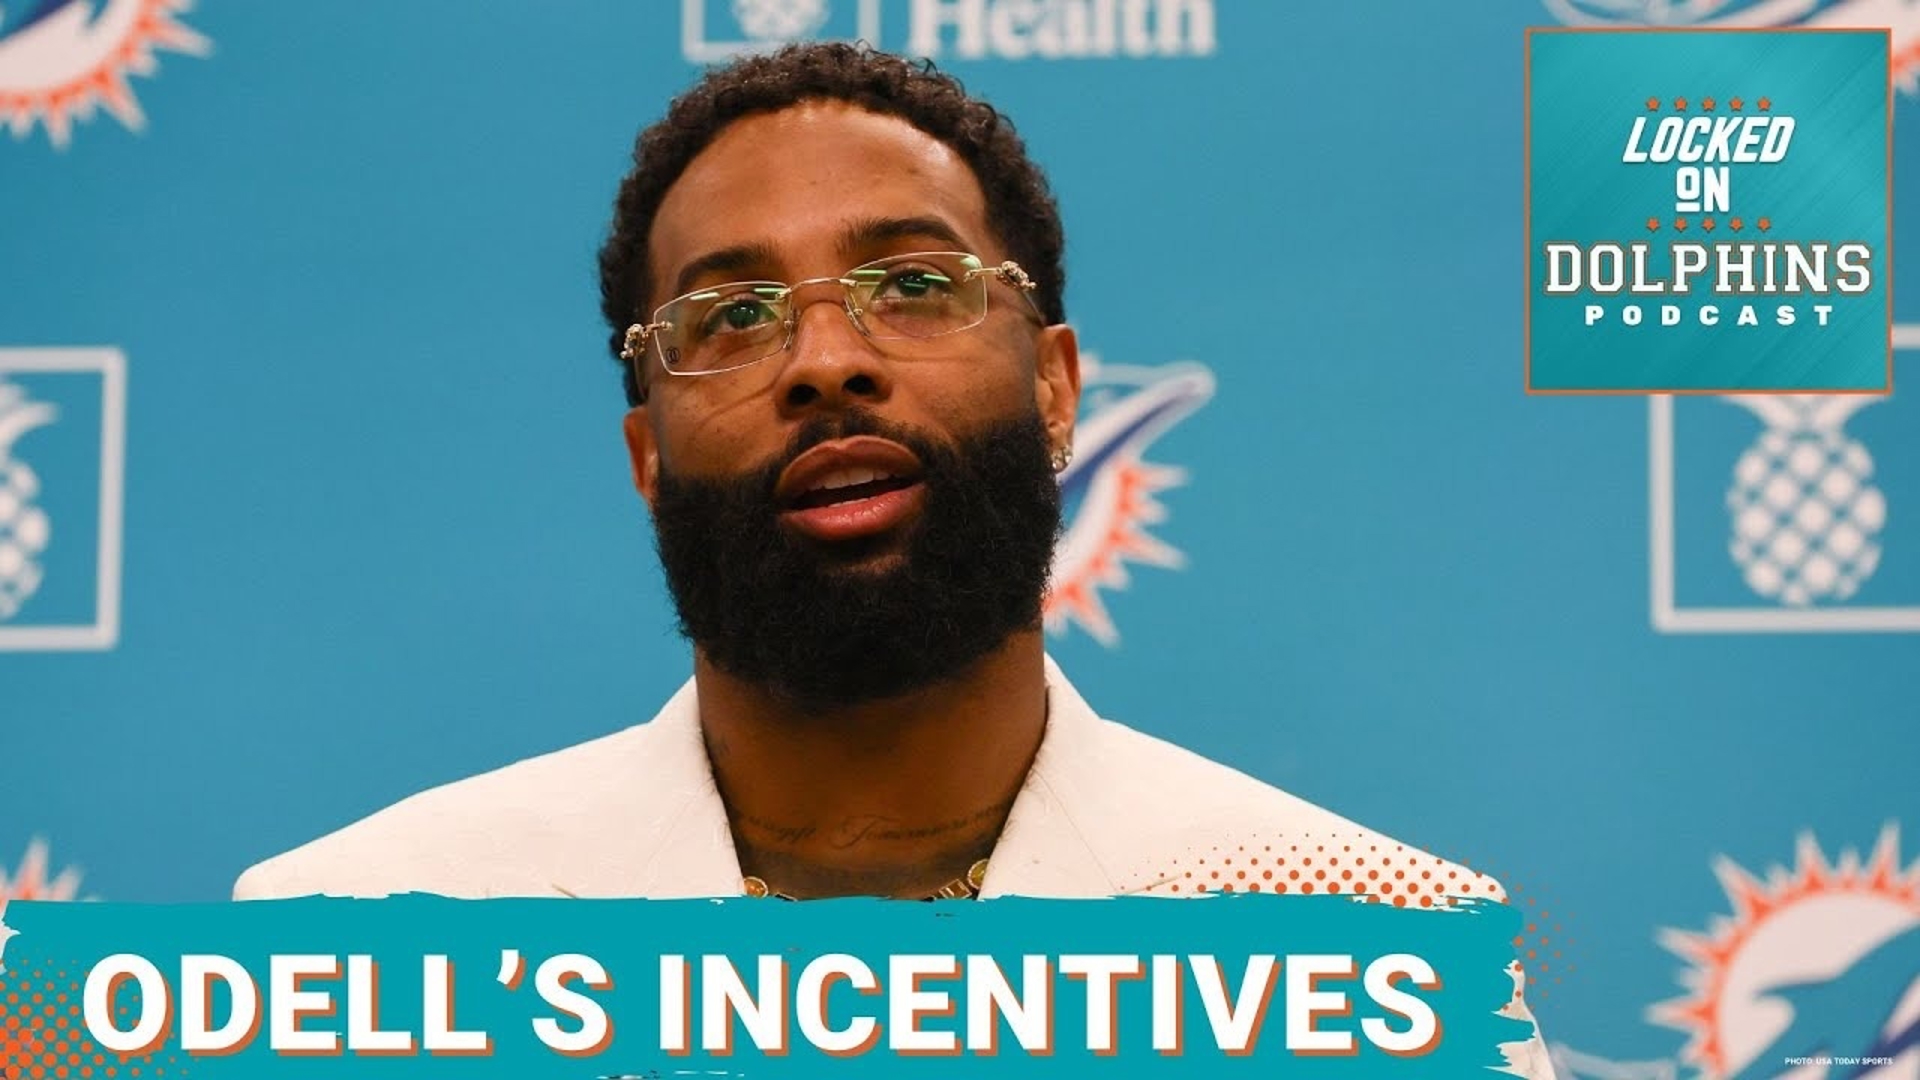 How were the Miami Dolphins able to strike a deal with WR Odell Beckham Jr.? With some creativity, some strategy and some incentivized dollars, that's how.